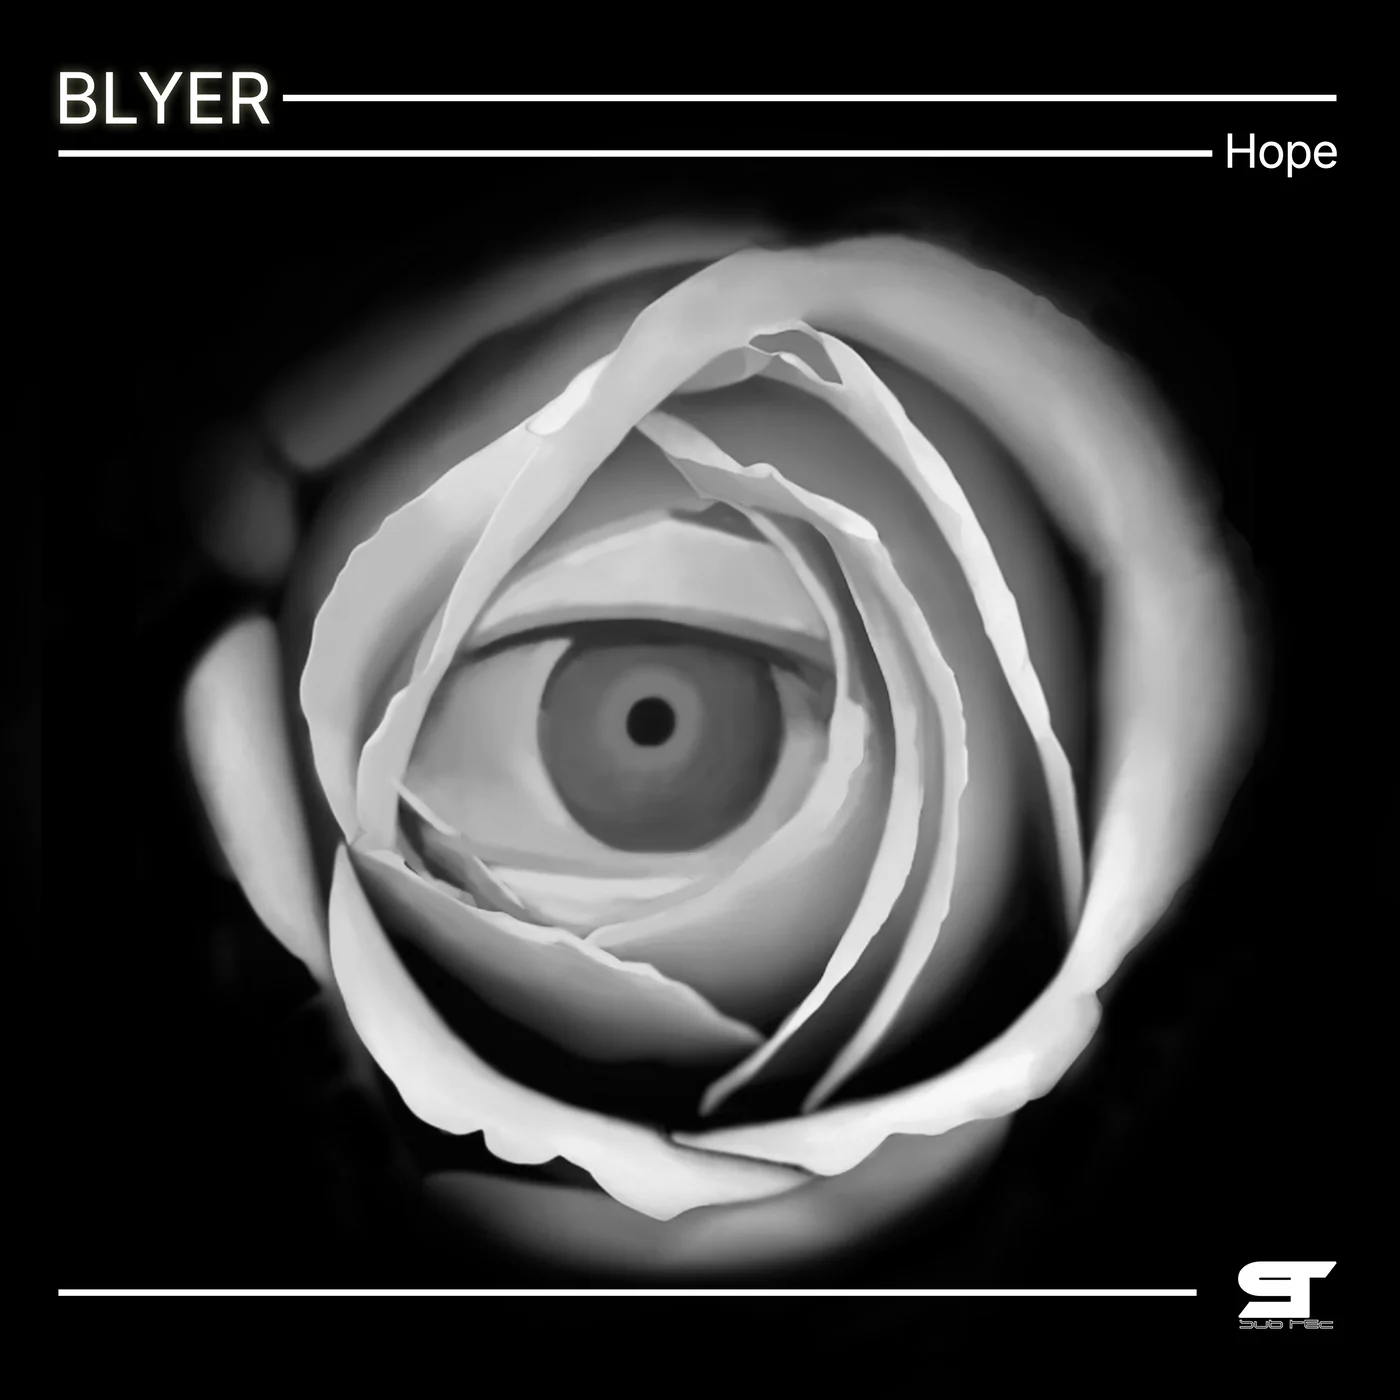 Blyer unveils a high-energy 4-track collection titled “Hope Ep”